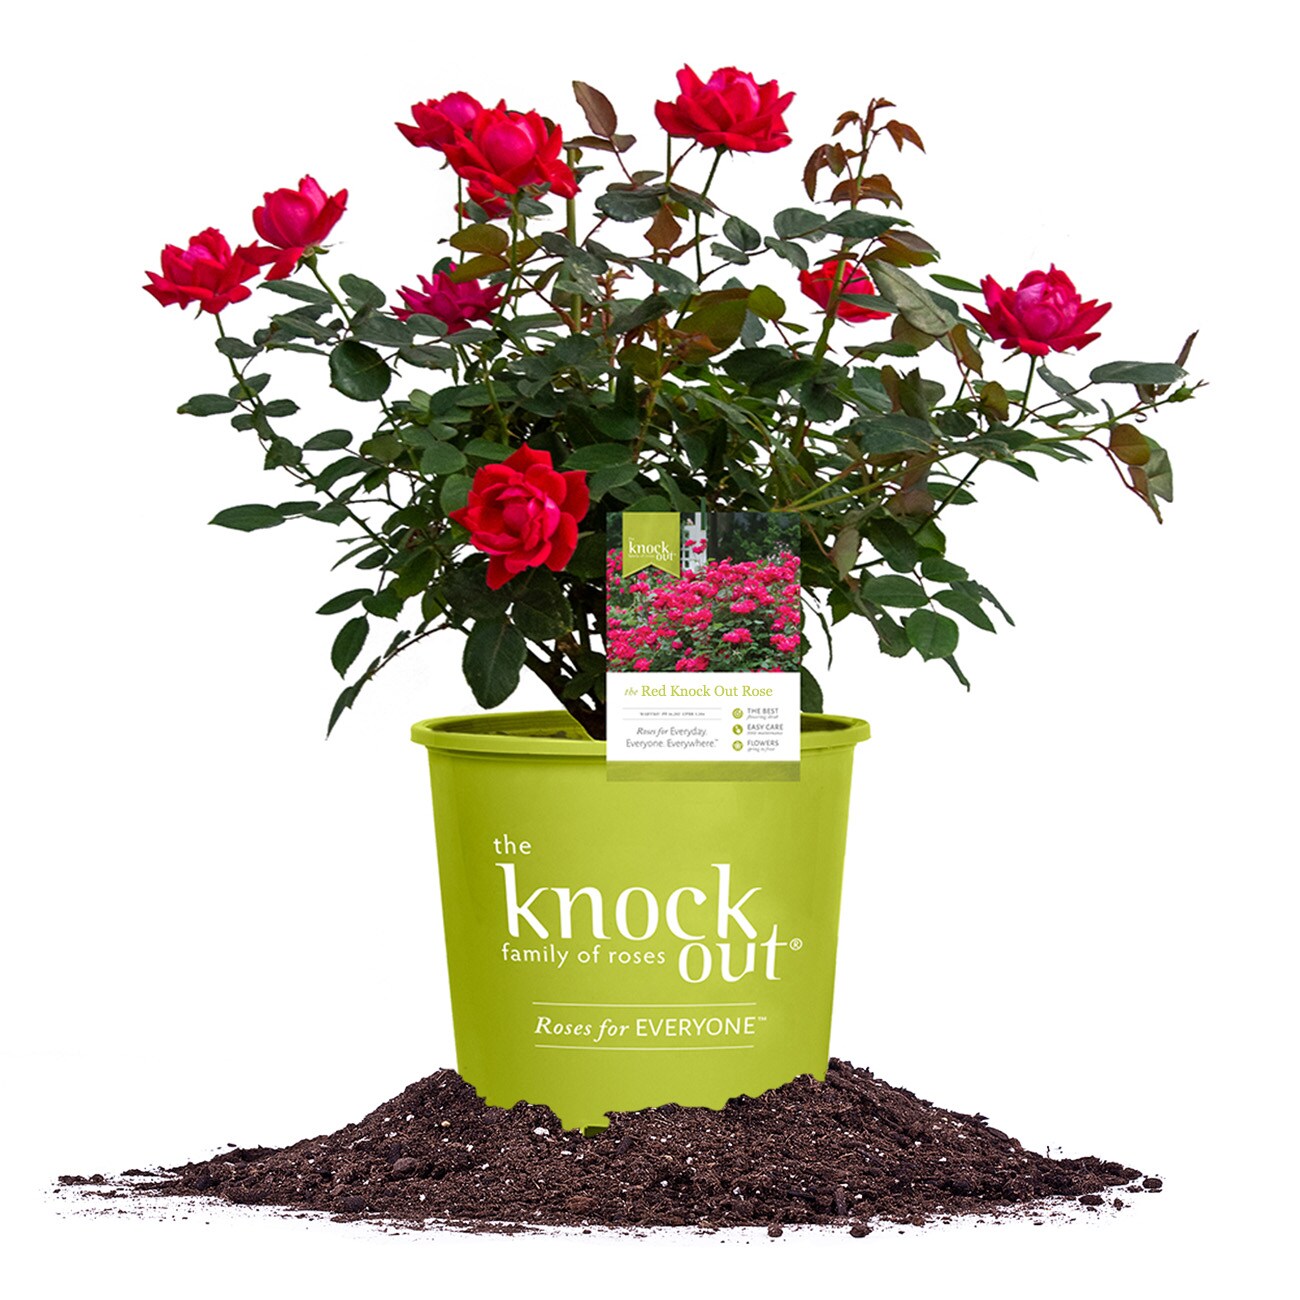 Red KnockOut Rose Plants, Bulbs & Seeds at Lowes.com